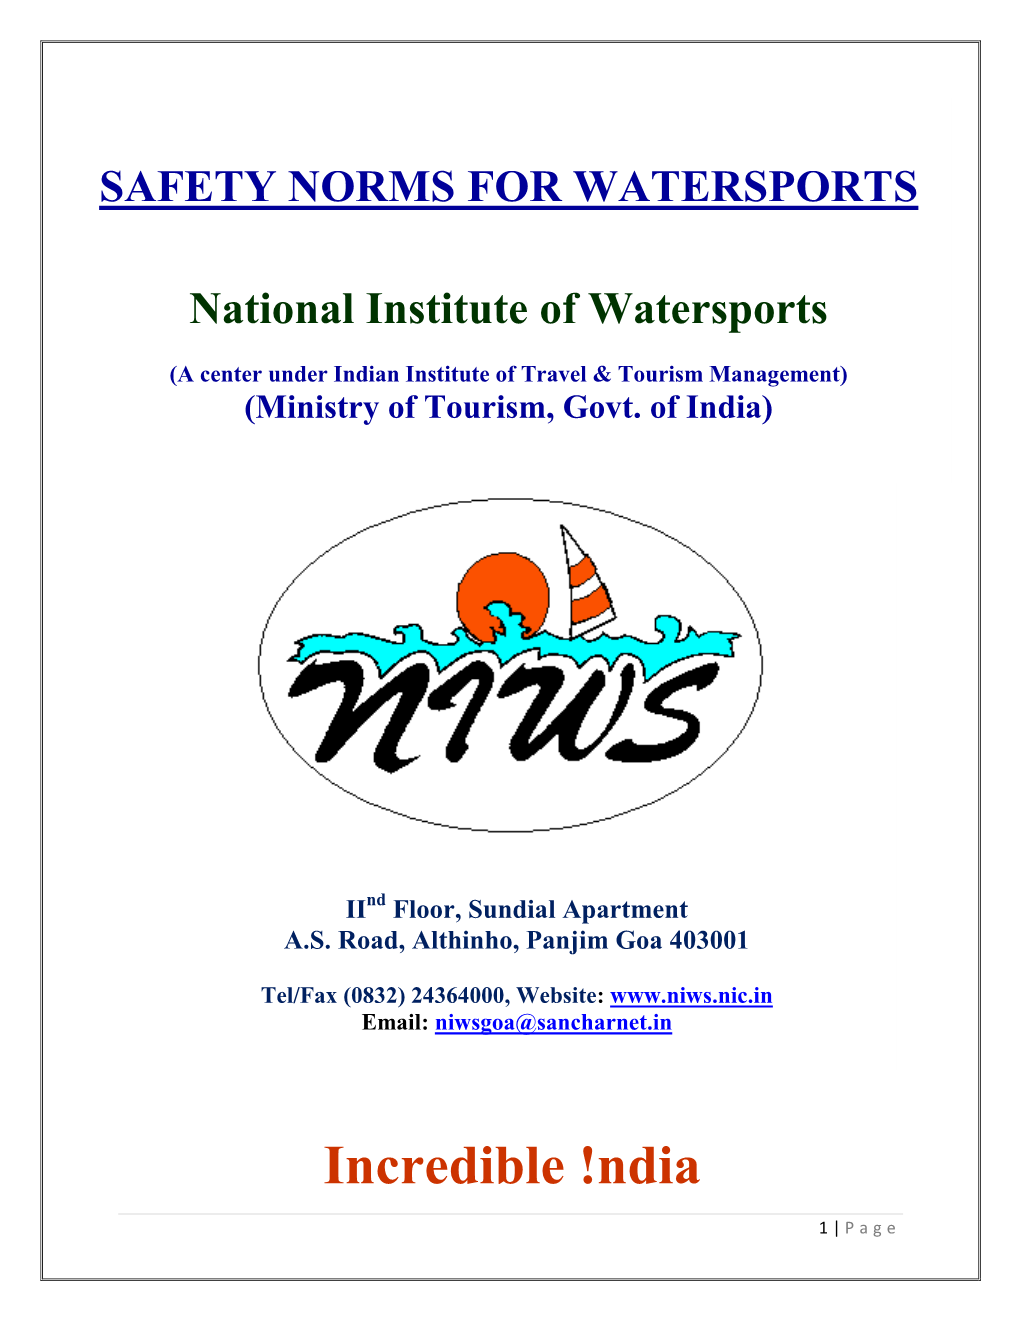 Safety Norms for Watersports